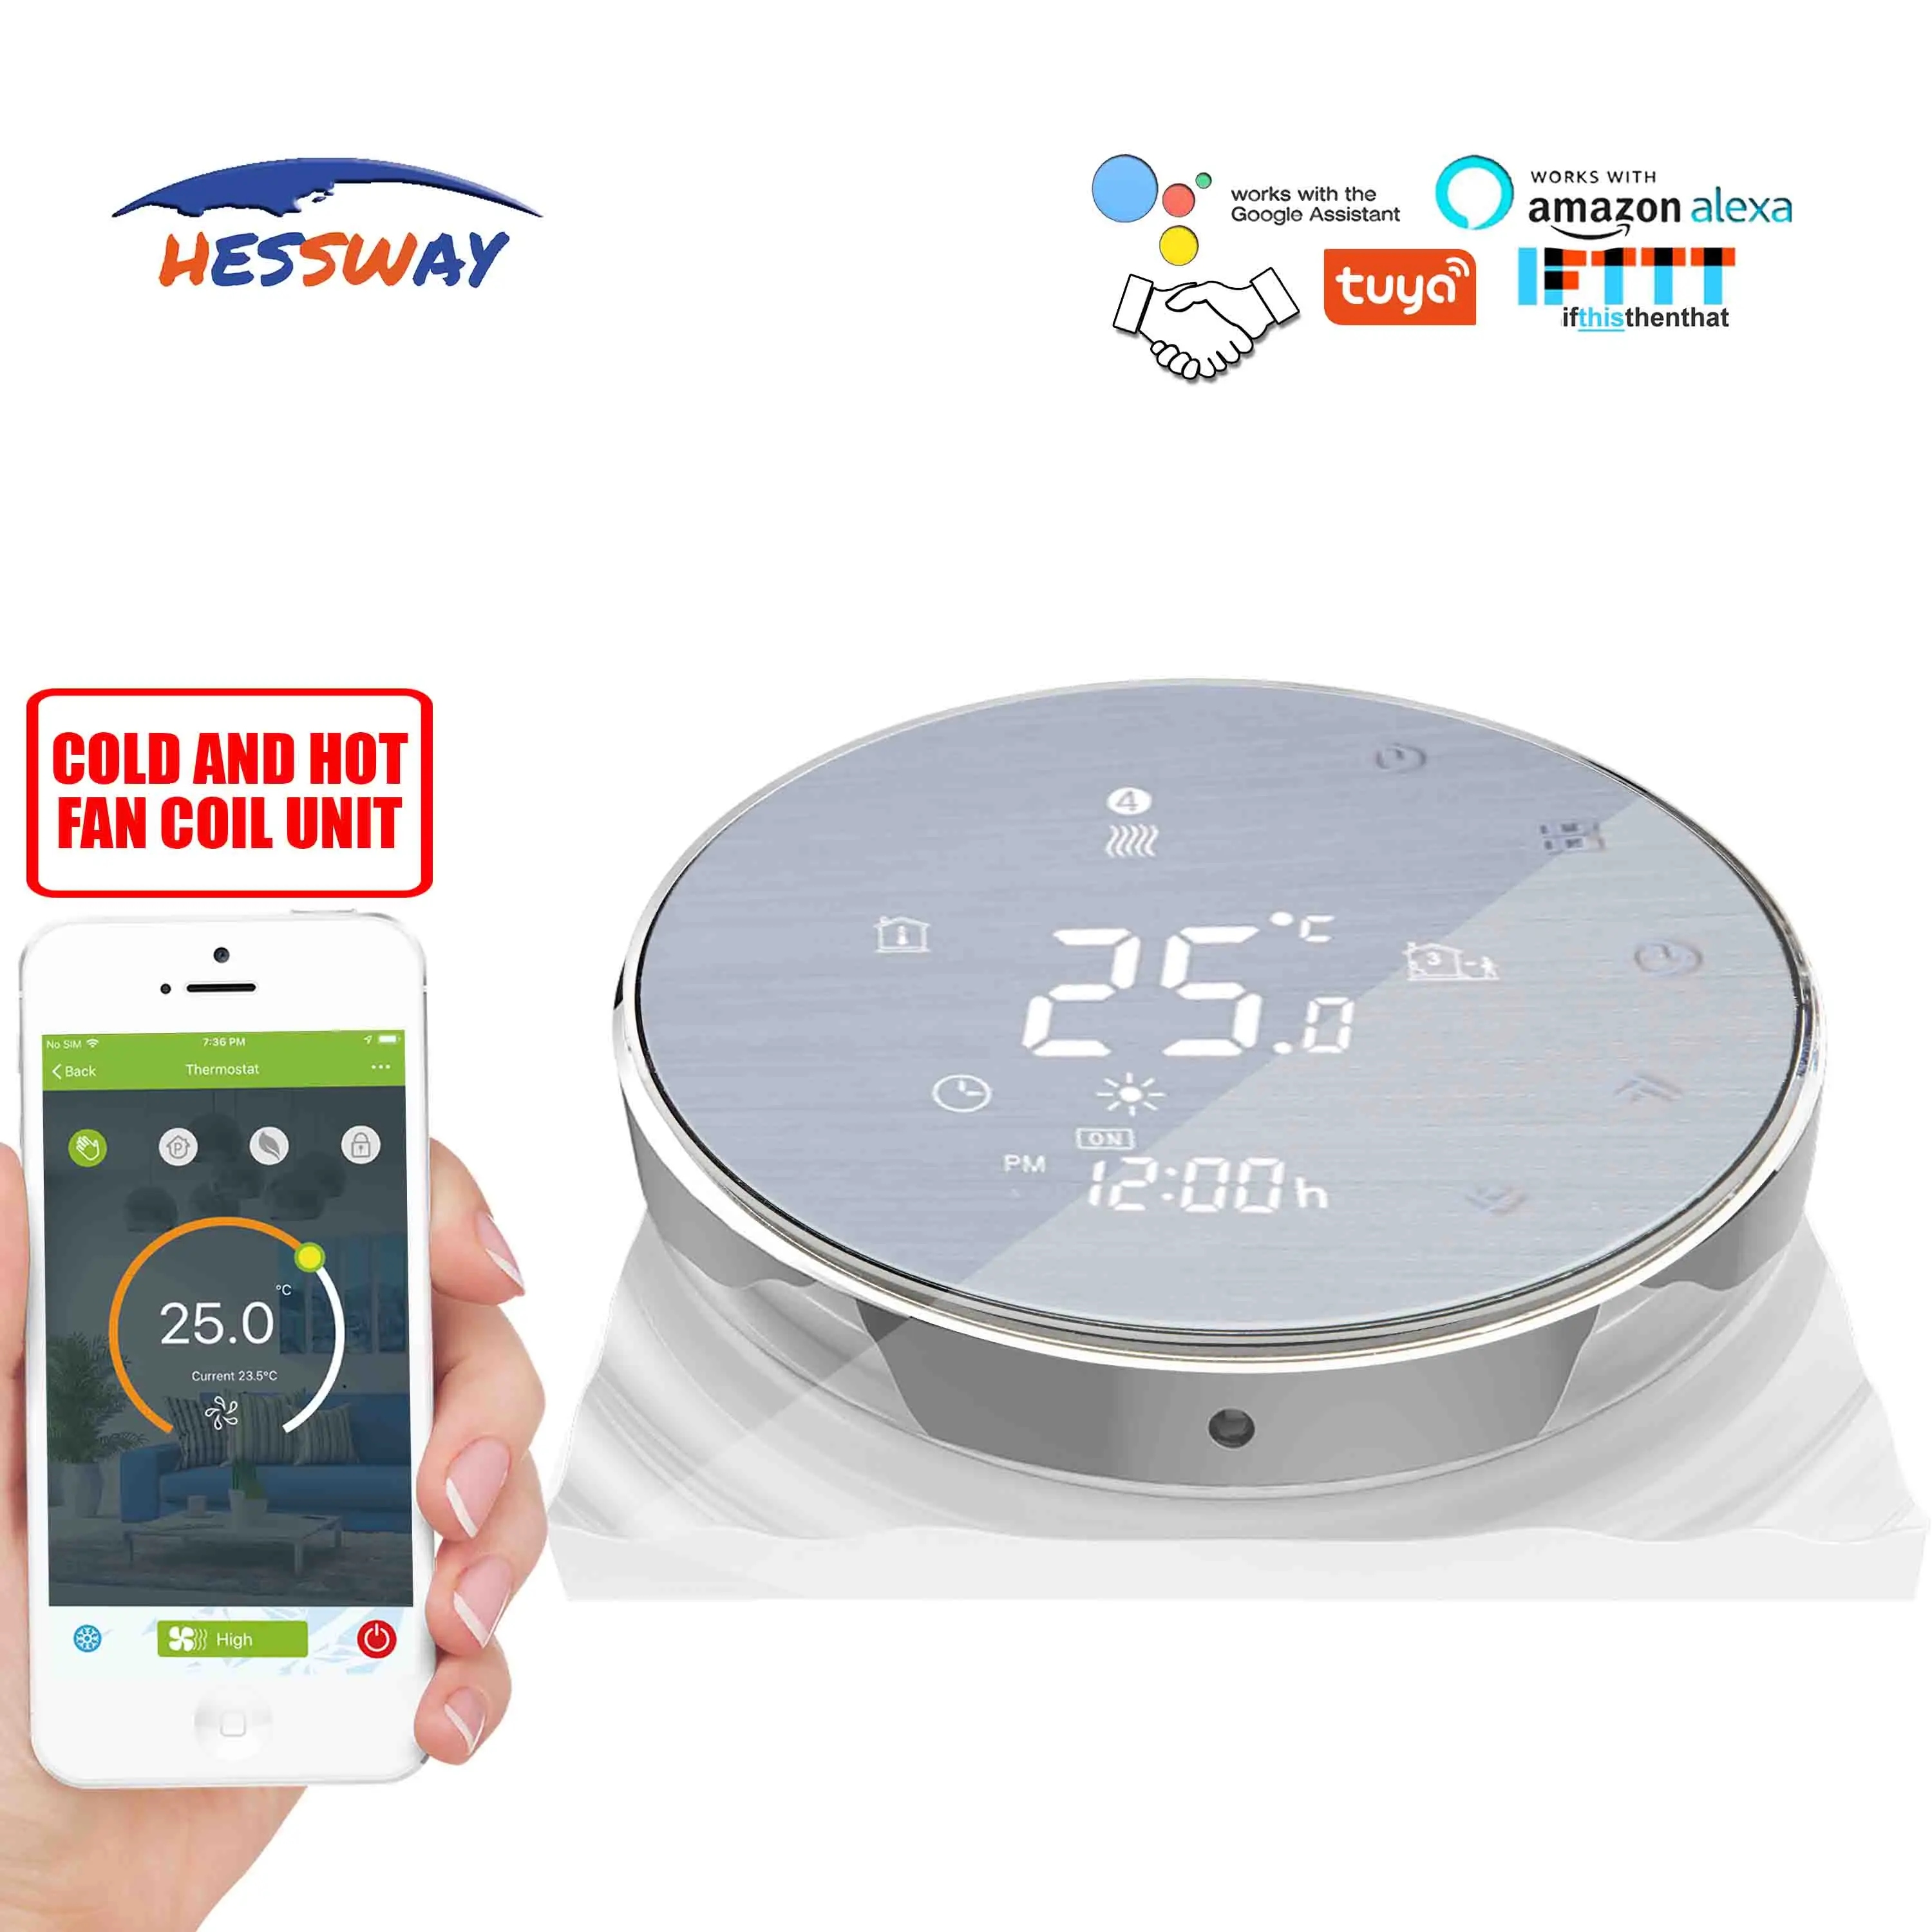 HESSWAY TUYA fan coil smart thermostat WIFI for heat cool temp regulator Surface wire drawing